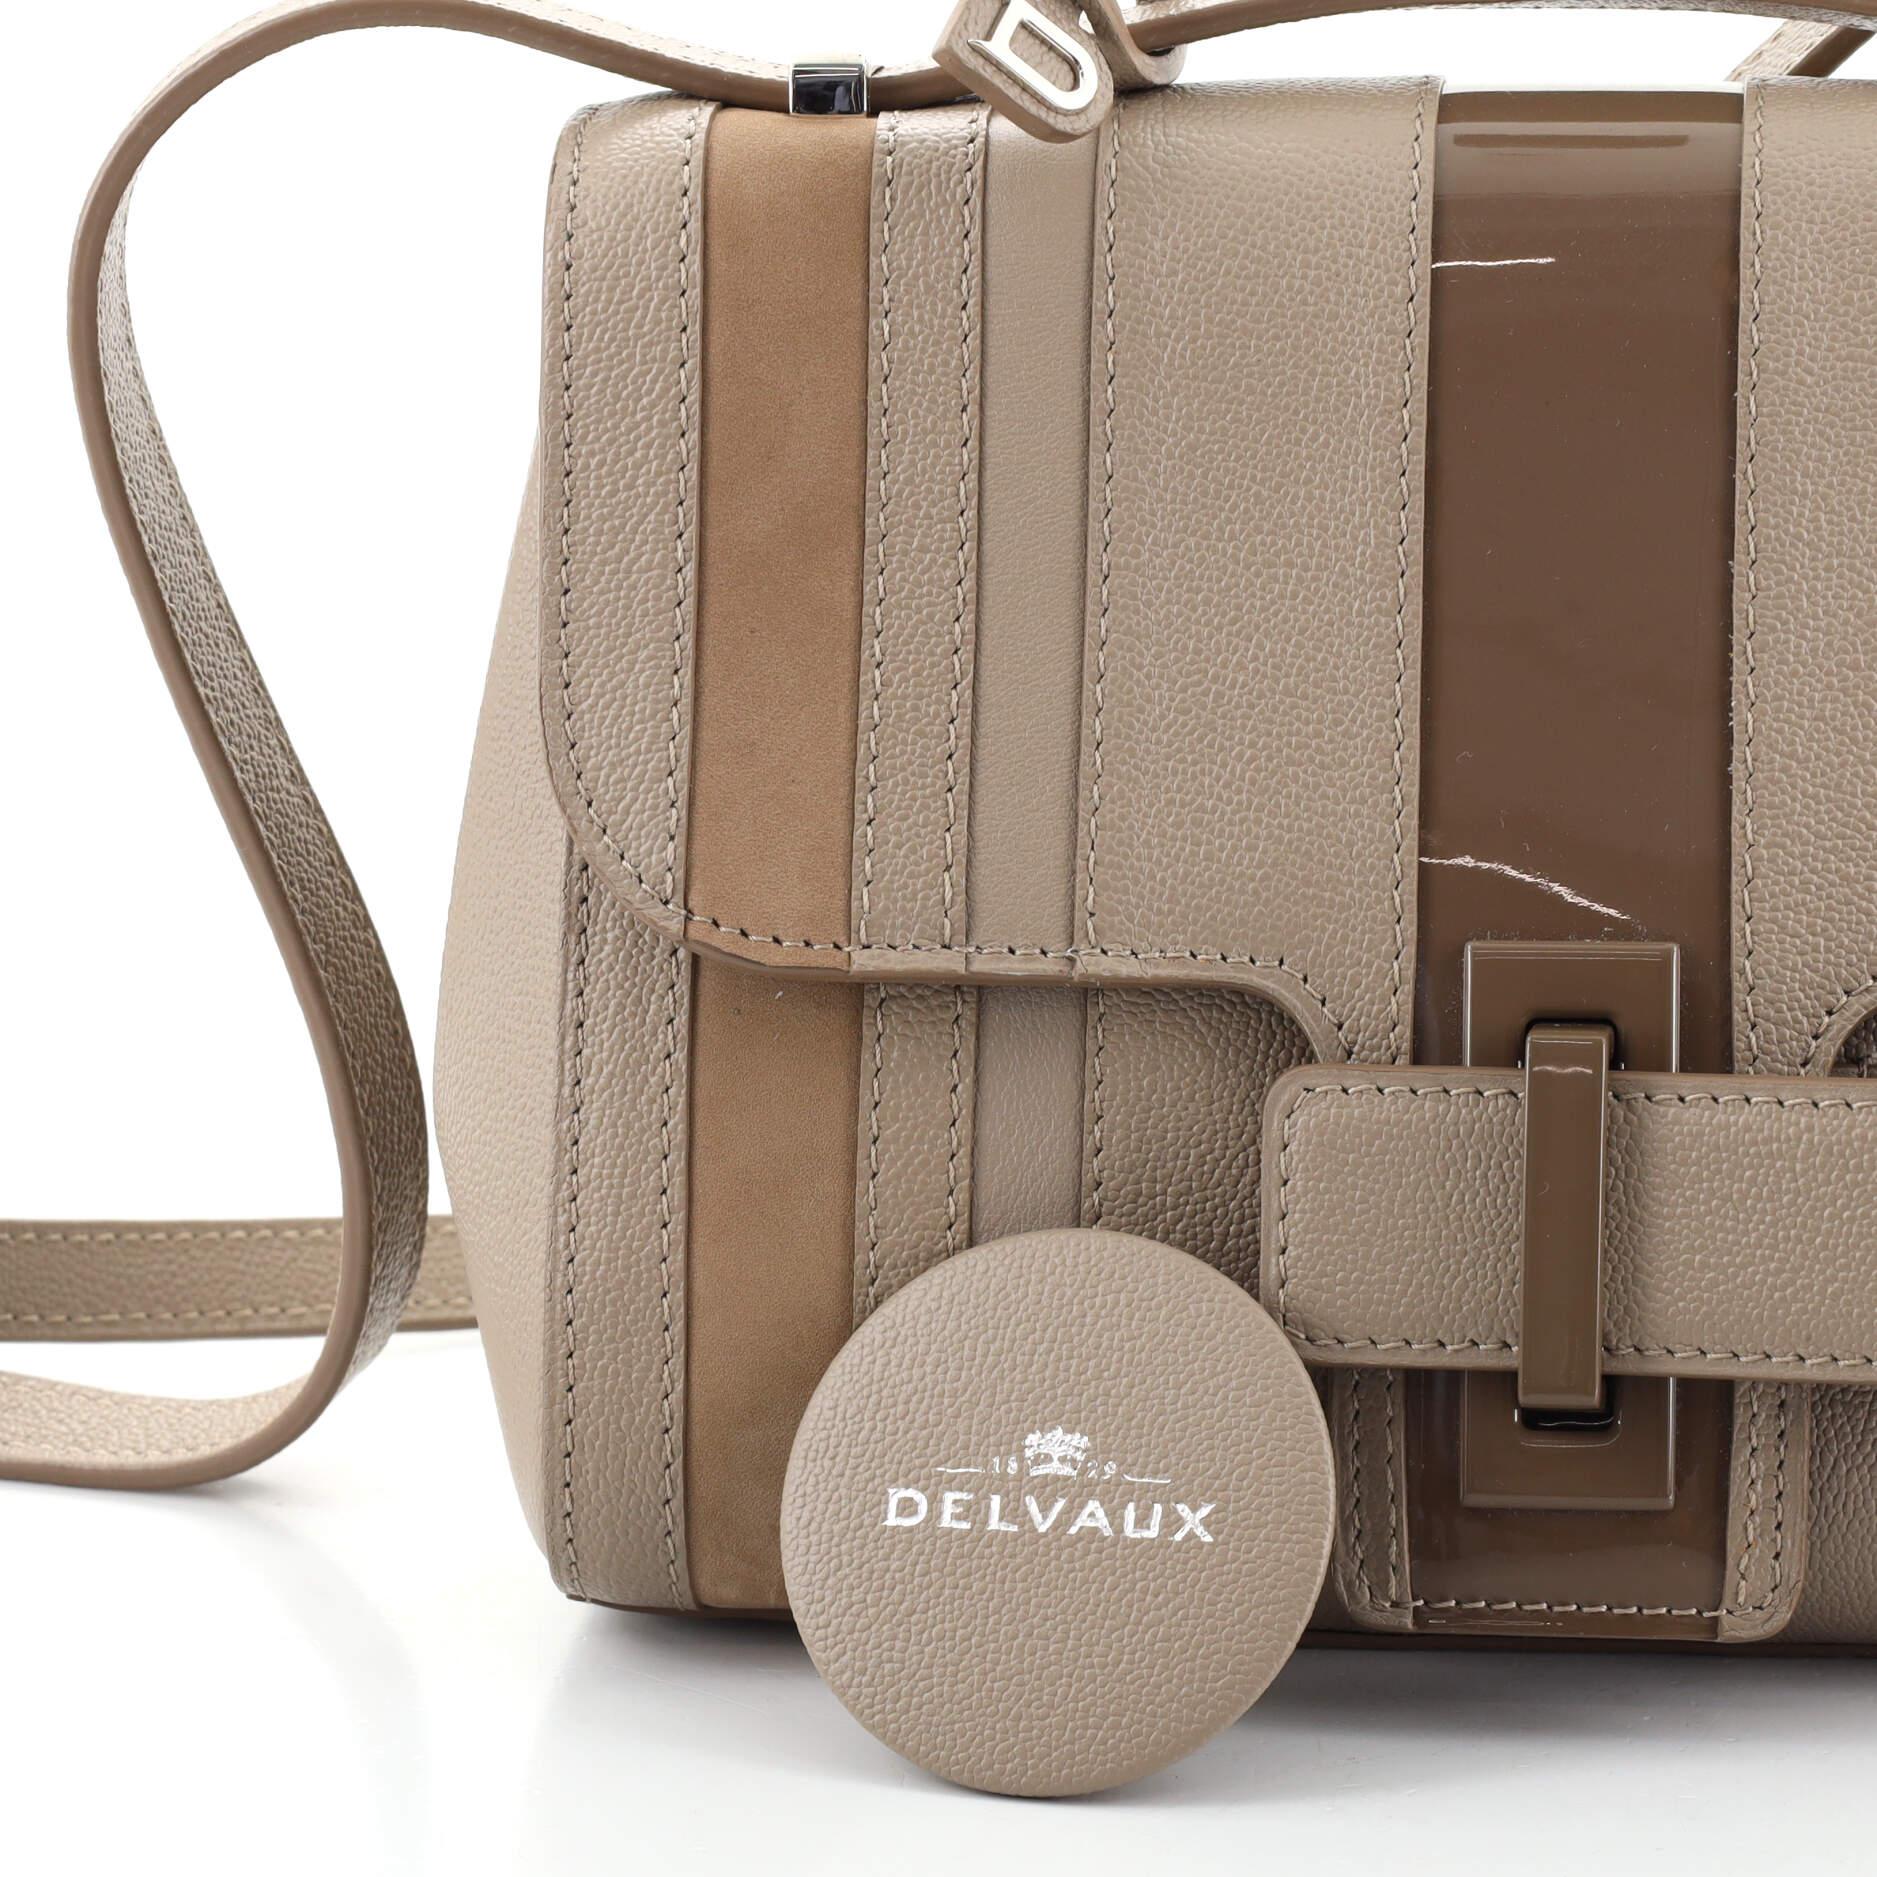 Brown Delvaux Simplissime City Shoulder Bag Striped Leather with Patent and Suede PM